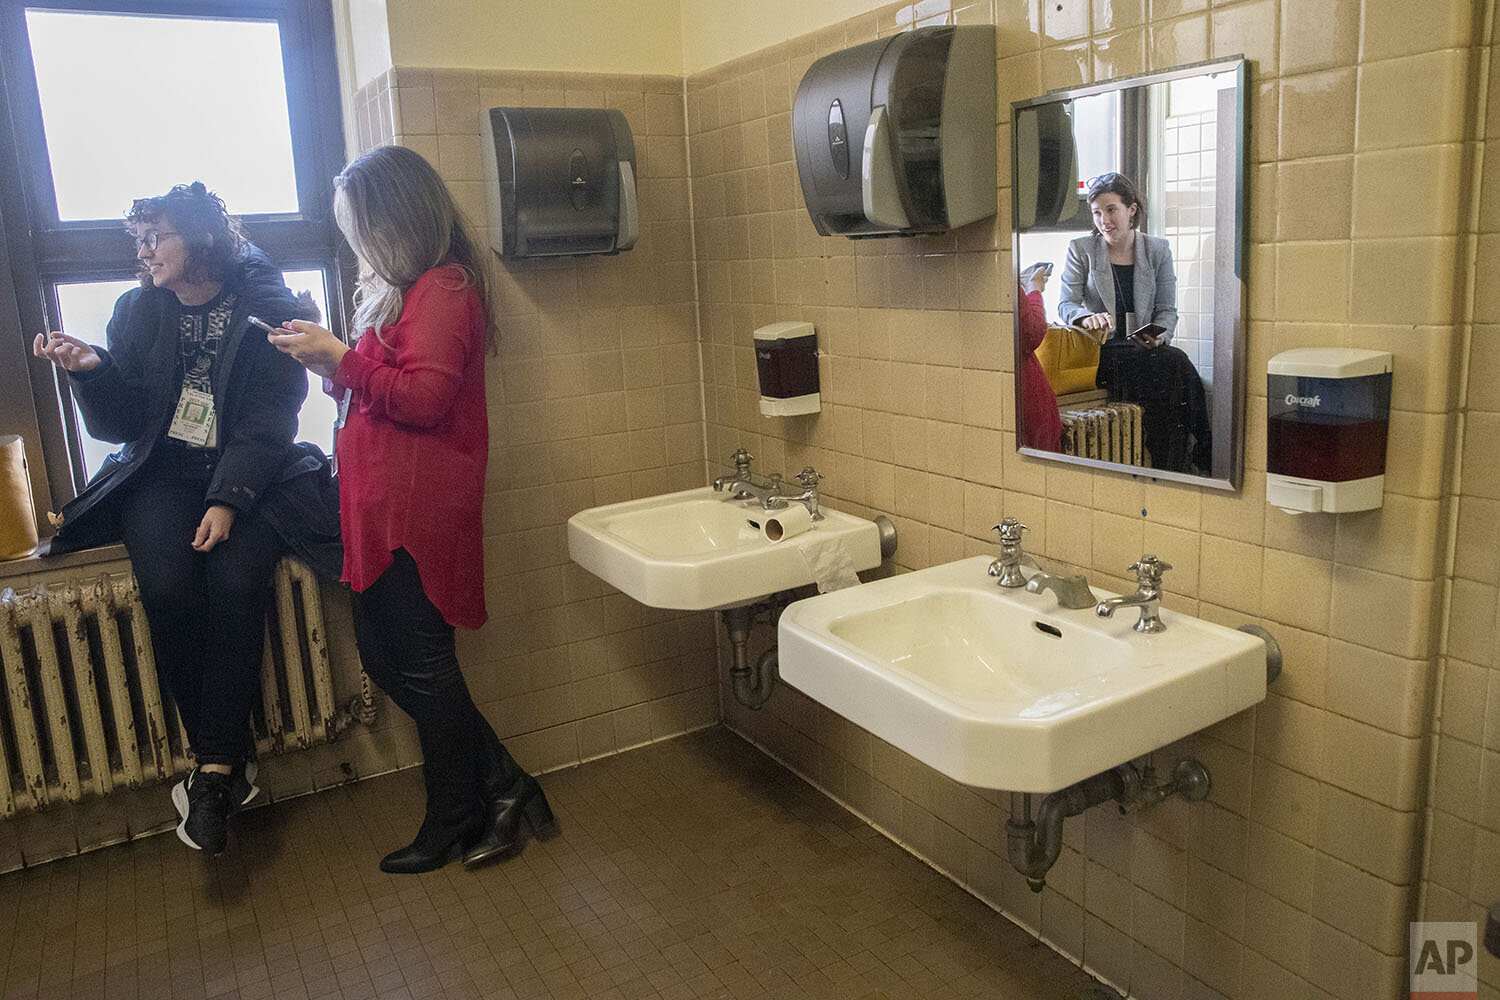  Vulture magazine freelance reporter Victoria Bekiempis, left, Fox News field producer Marta Dhanis, center, and New York Daily News reporter Molly Crane-Newman, take a break from Harvey Weinstein’s rape trial in the women’s restroom, Wednesday, Feb.